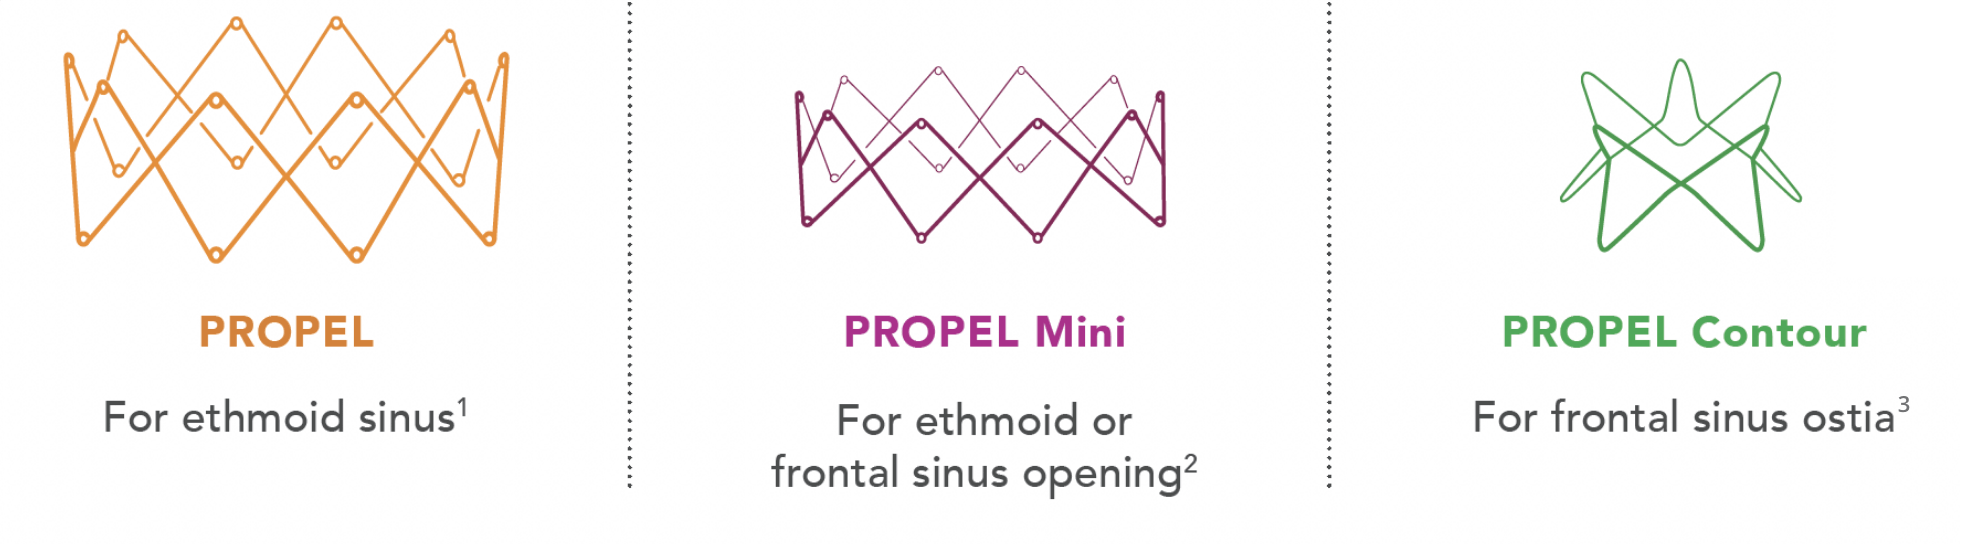 the PROPEL family of sinus implants